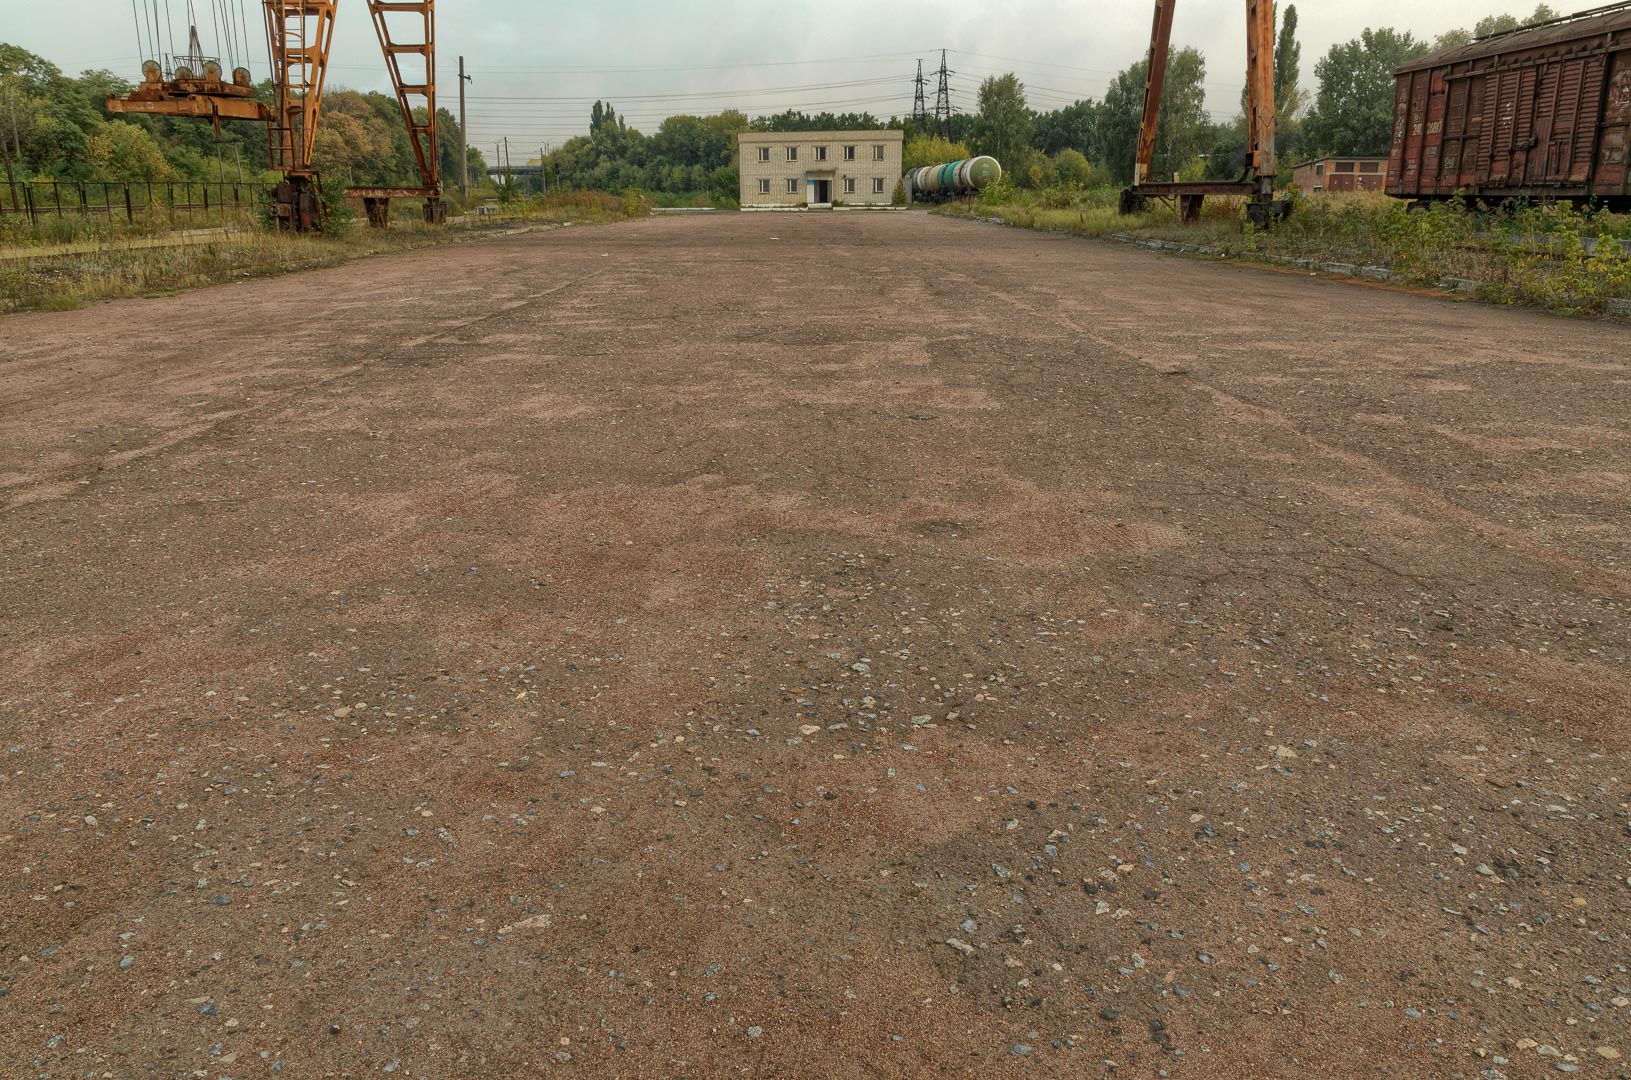 Backplate • ID: 5221 • HDRI Haven - Parking Lot By Railway